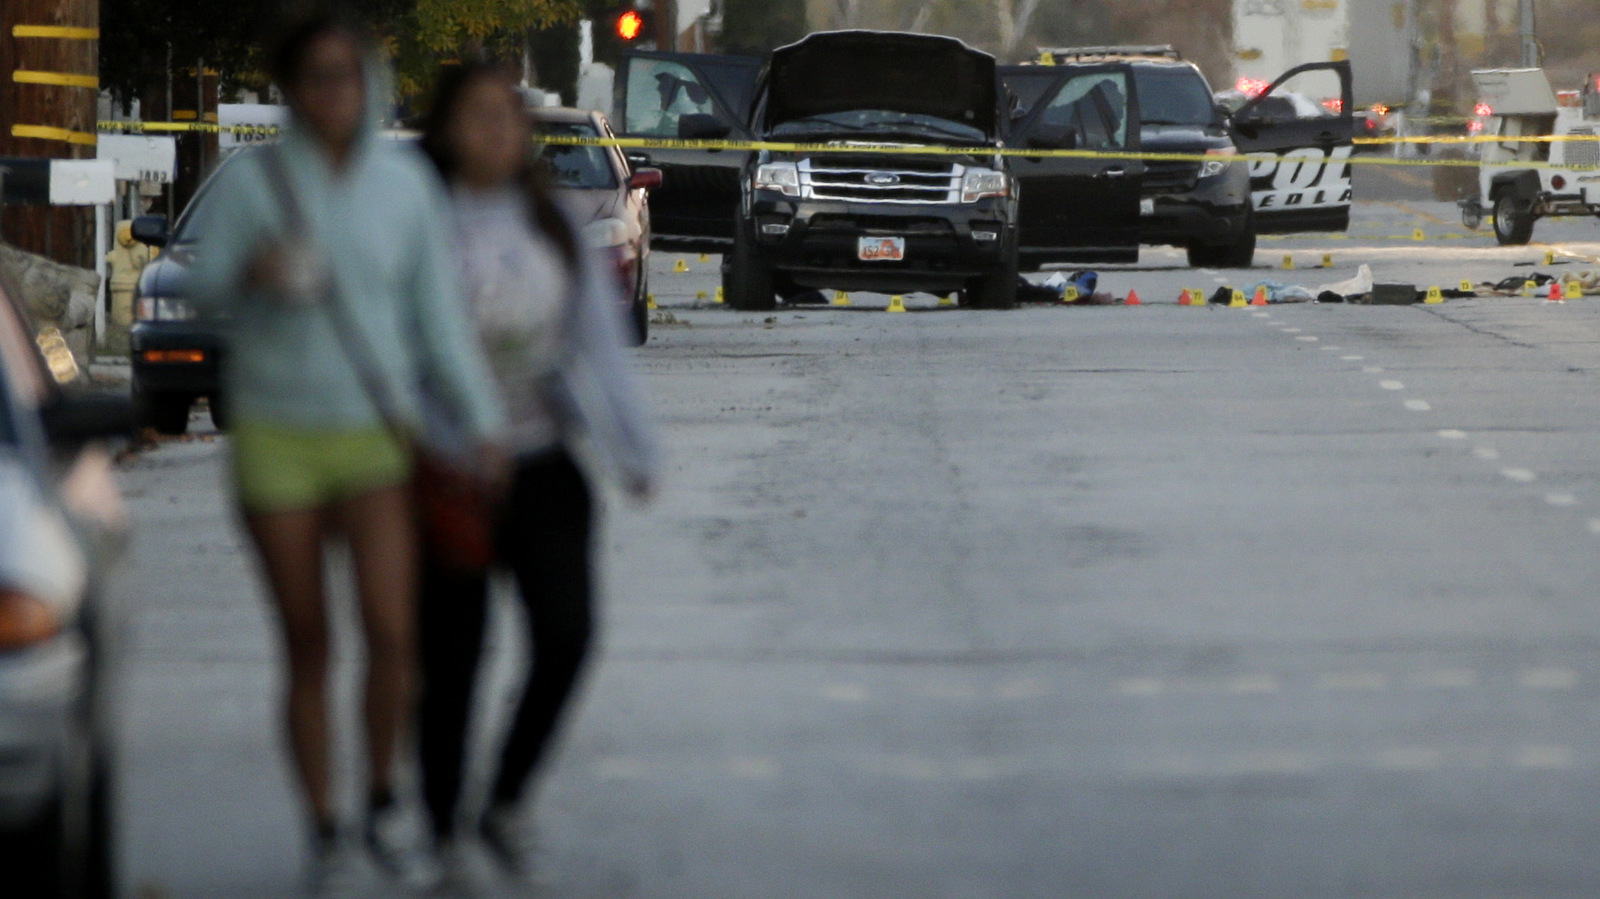 Two residents walk along the street where a police shootout with suspects took place, Thursday, Dec. 3, 2015, in San Bernardino, Calif. (AP Photo/Jae C. Hong)